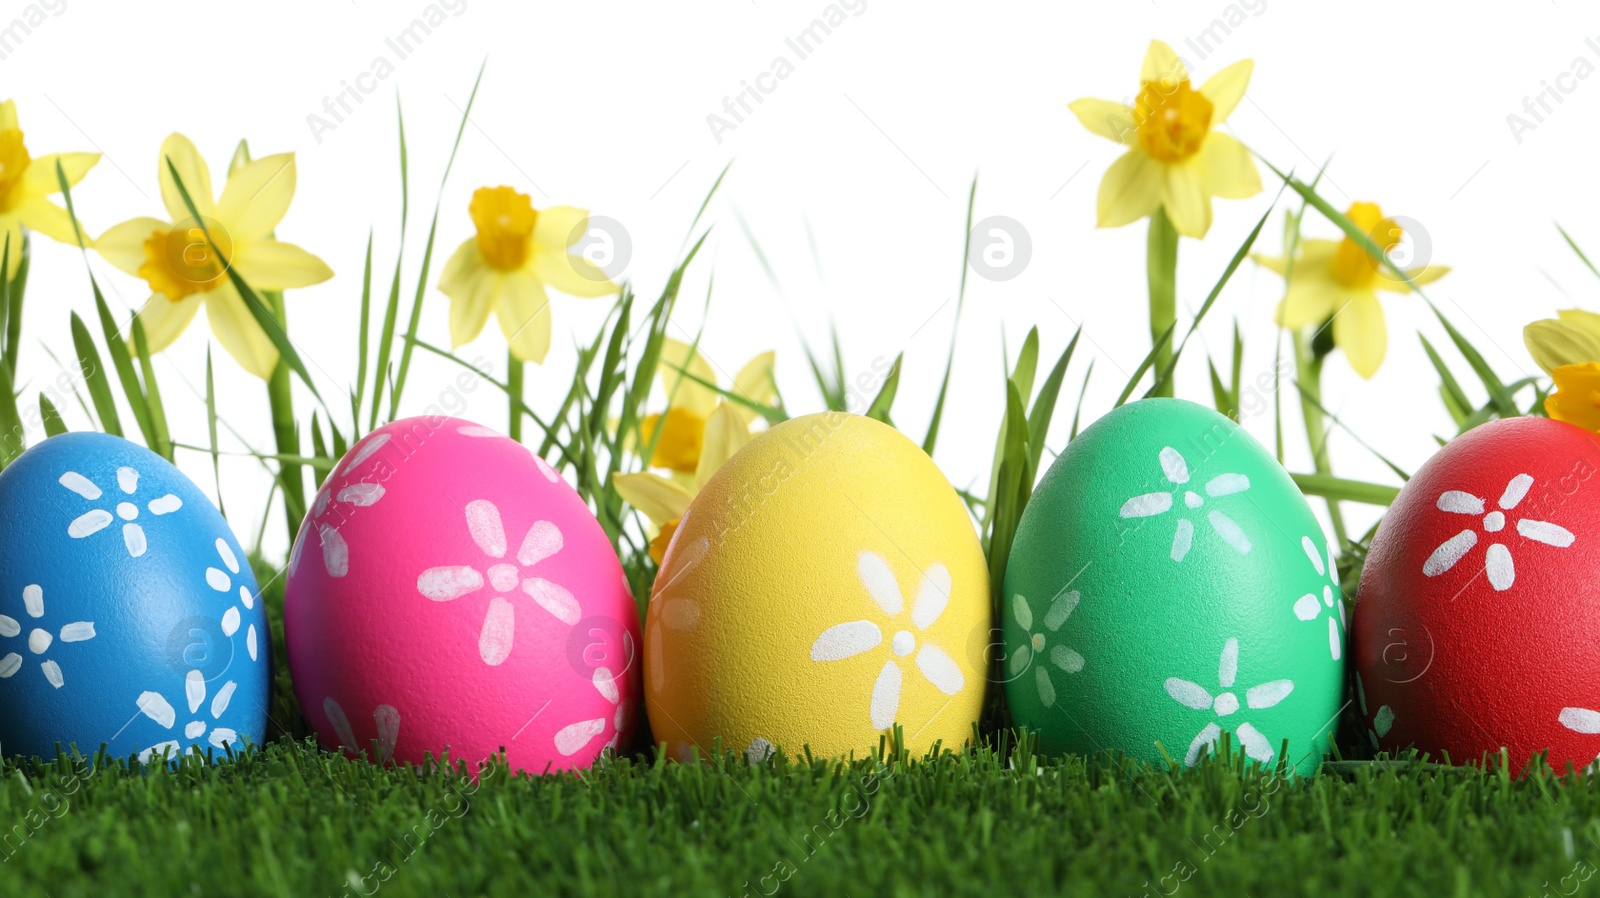 Photo of Colorful Easter eggs and daffodil flowers in green grass against white background